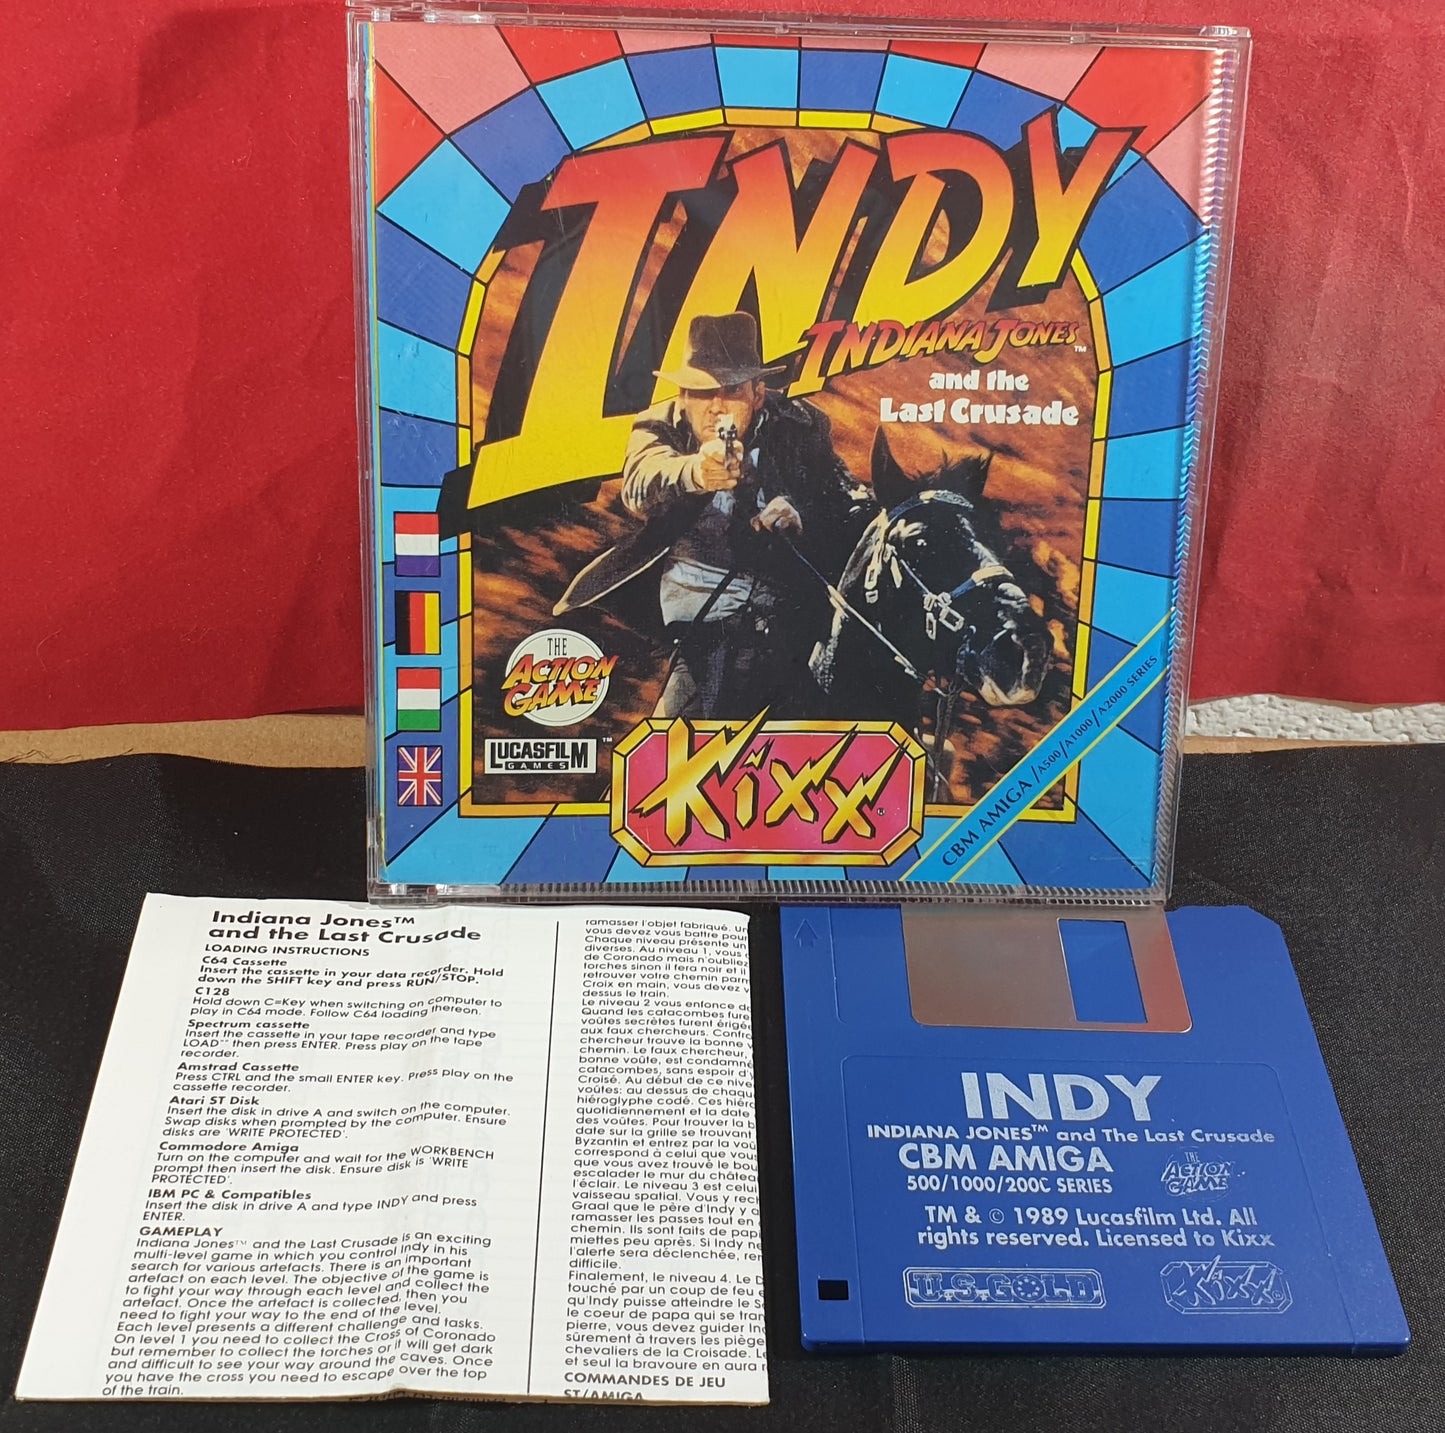 Indiana Jones and the Last Crusade the Action Game Amiga Game